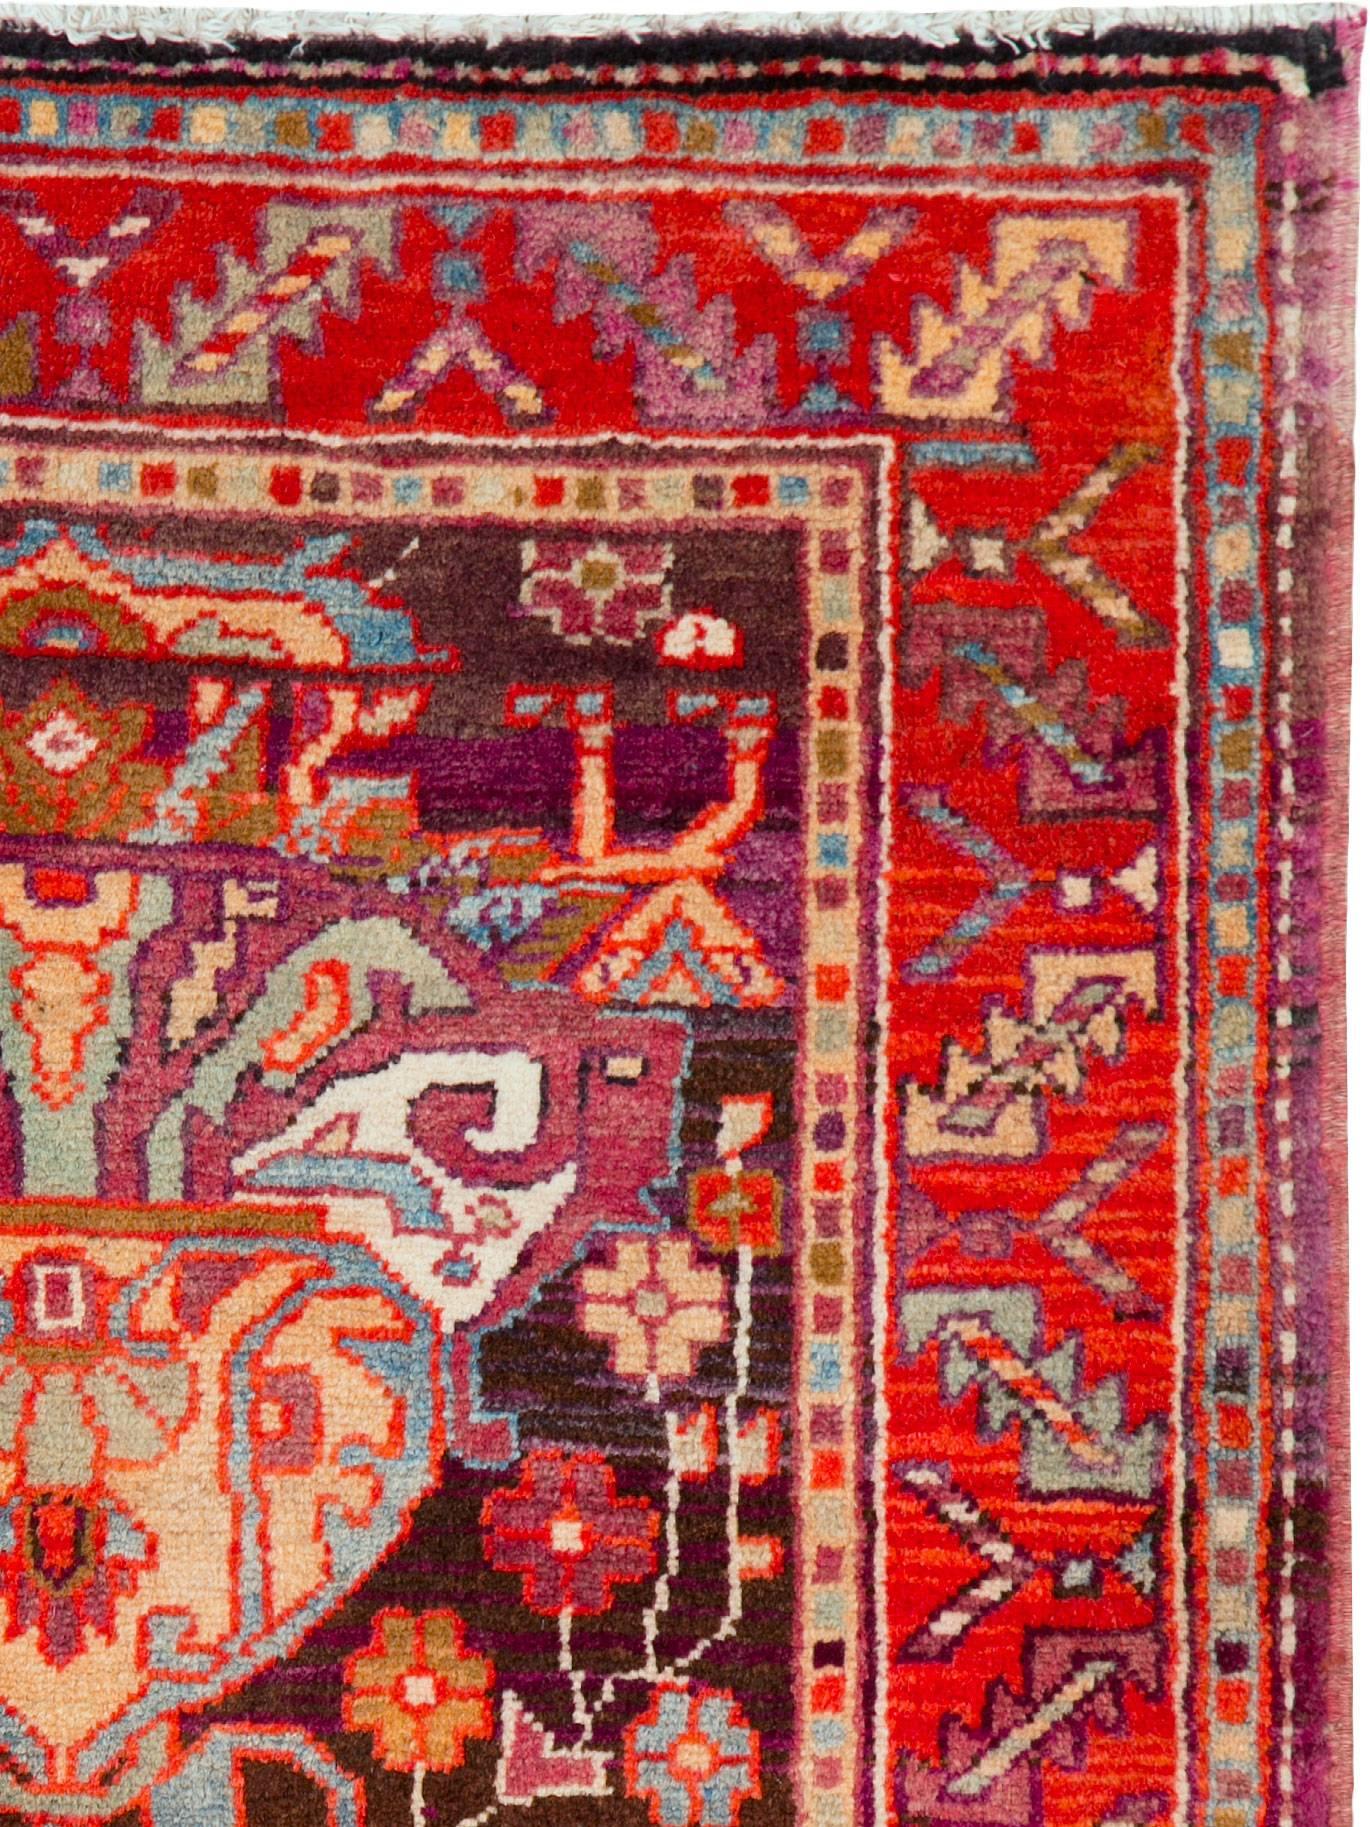 A vintage Persian Hamadan carpet from the late 20th century.

Measures: 2' 4